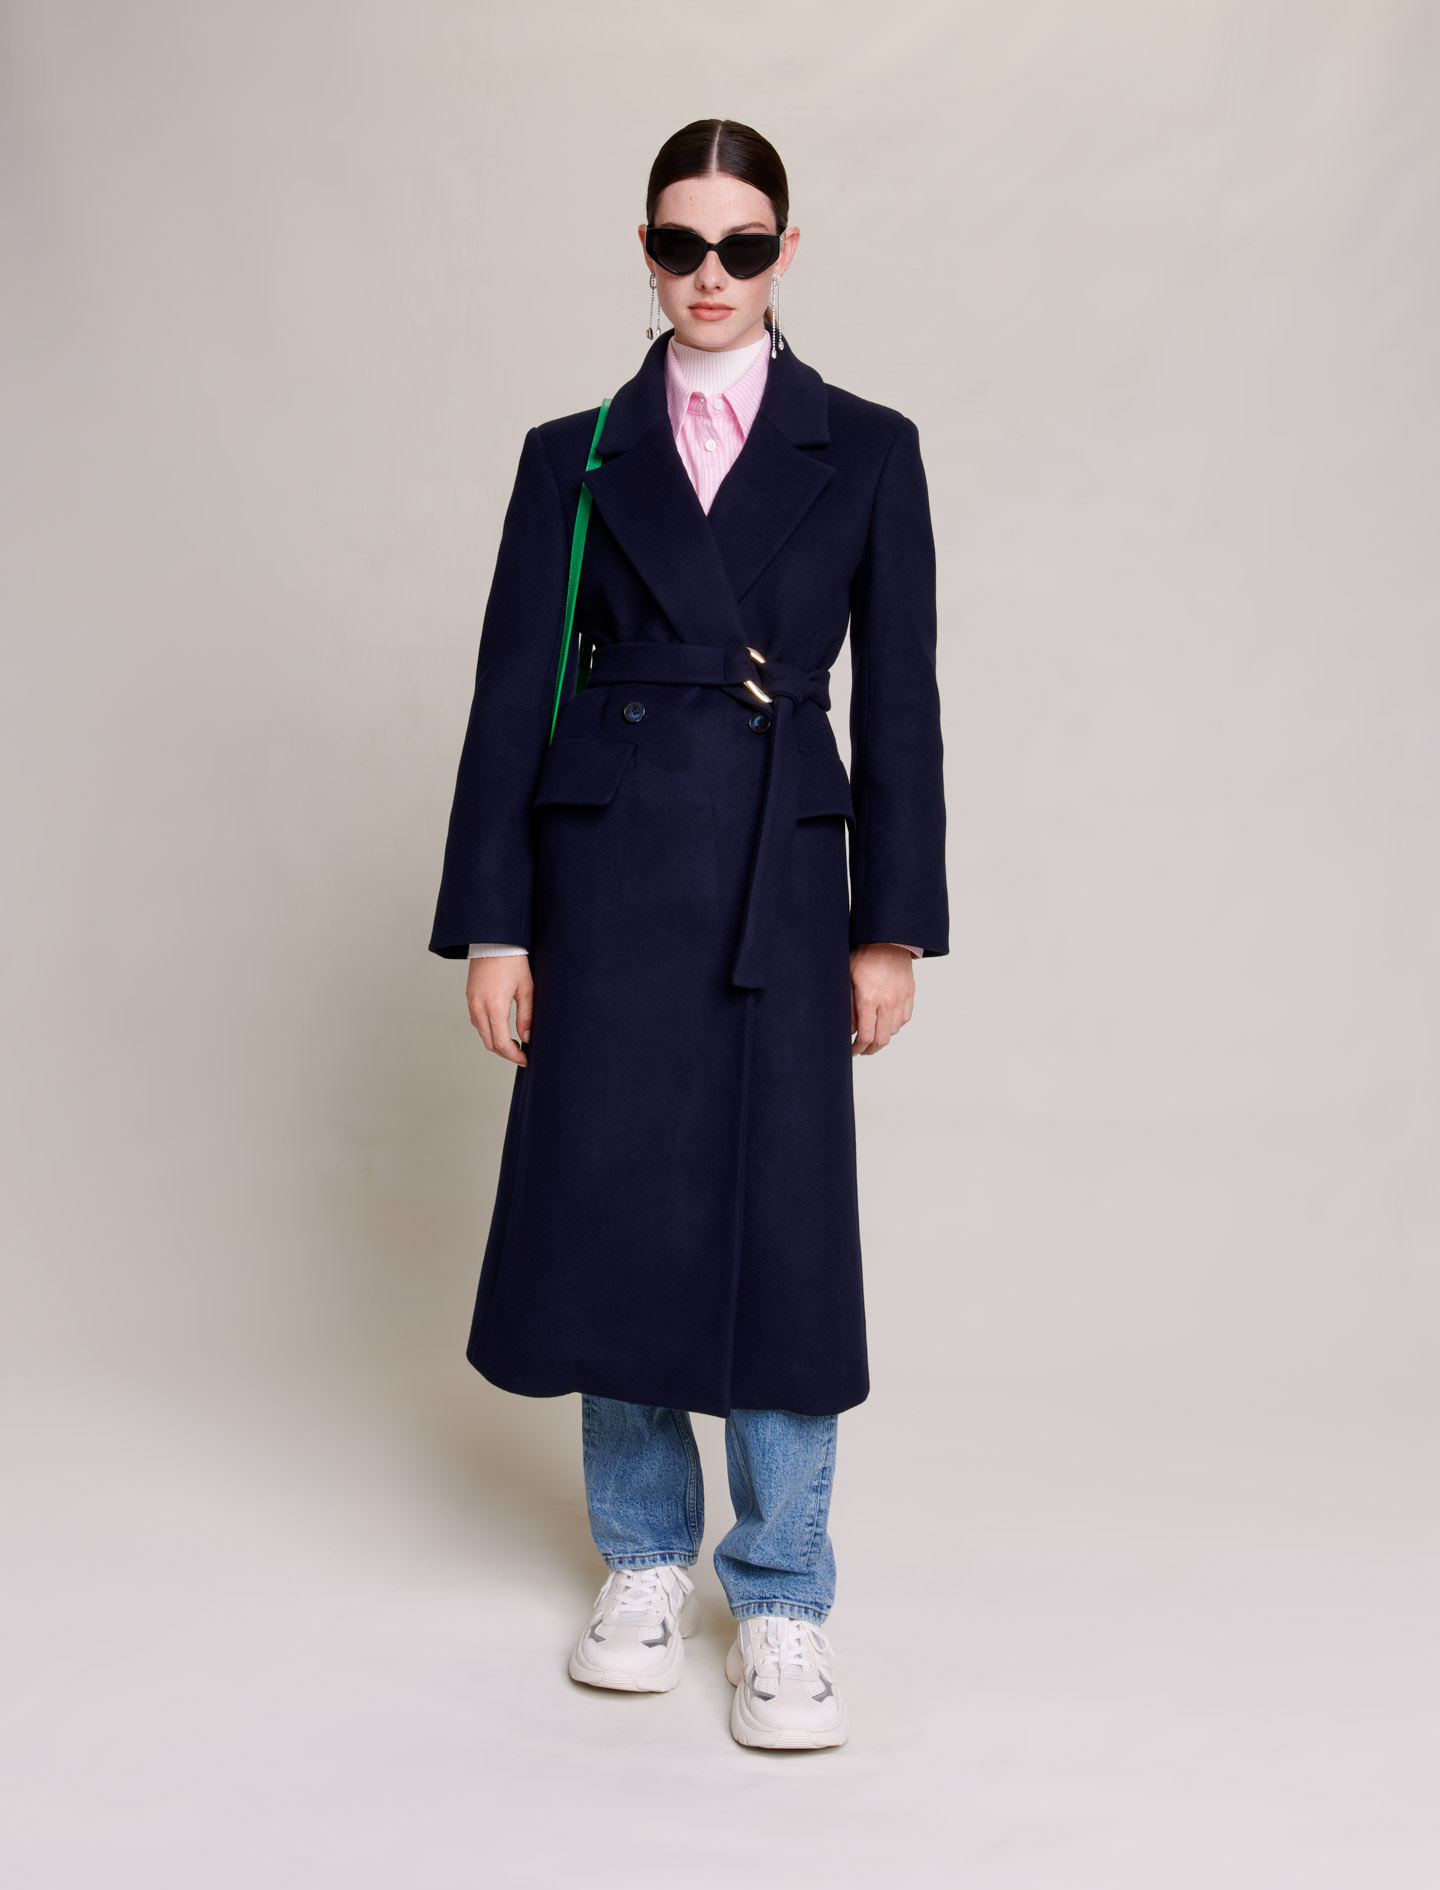 Maje Woman's wool, Long coat for Fall/Winter, in color Navy / Blue